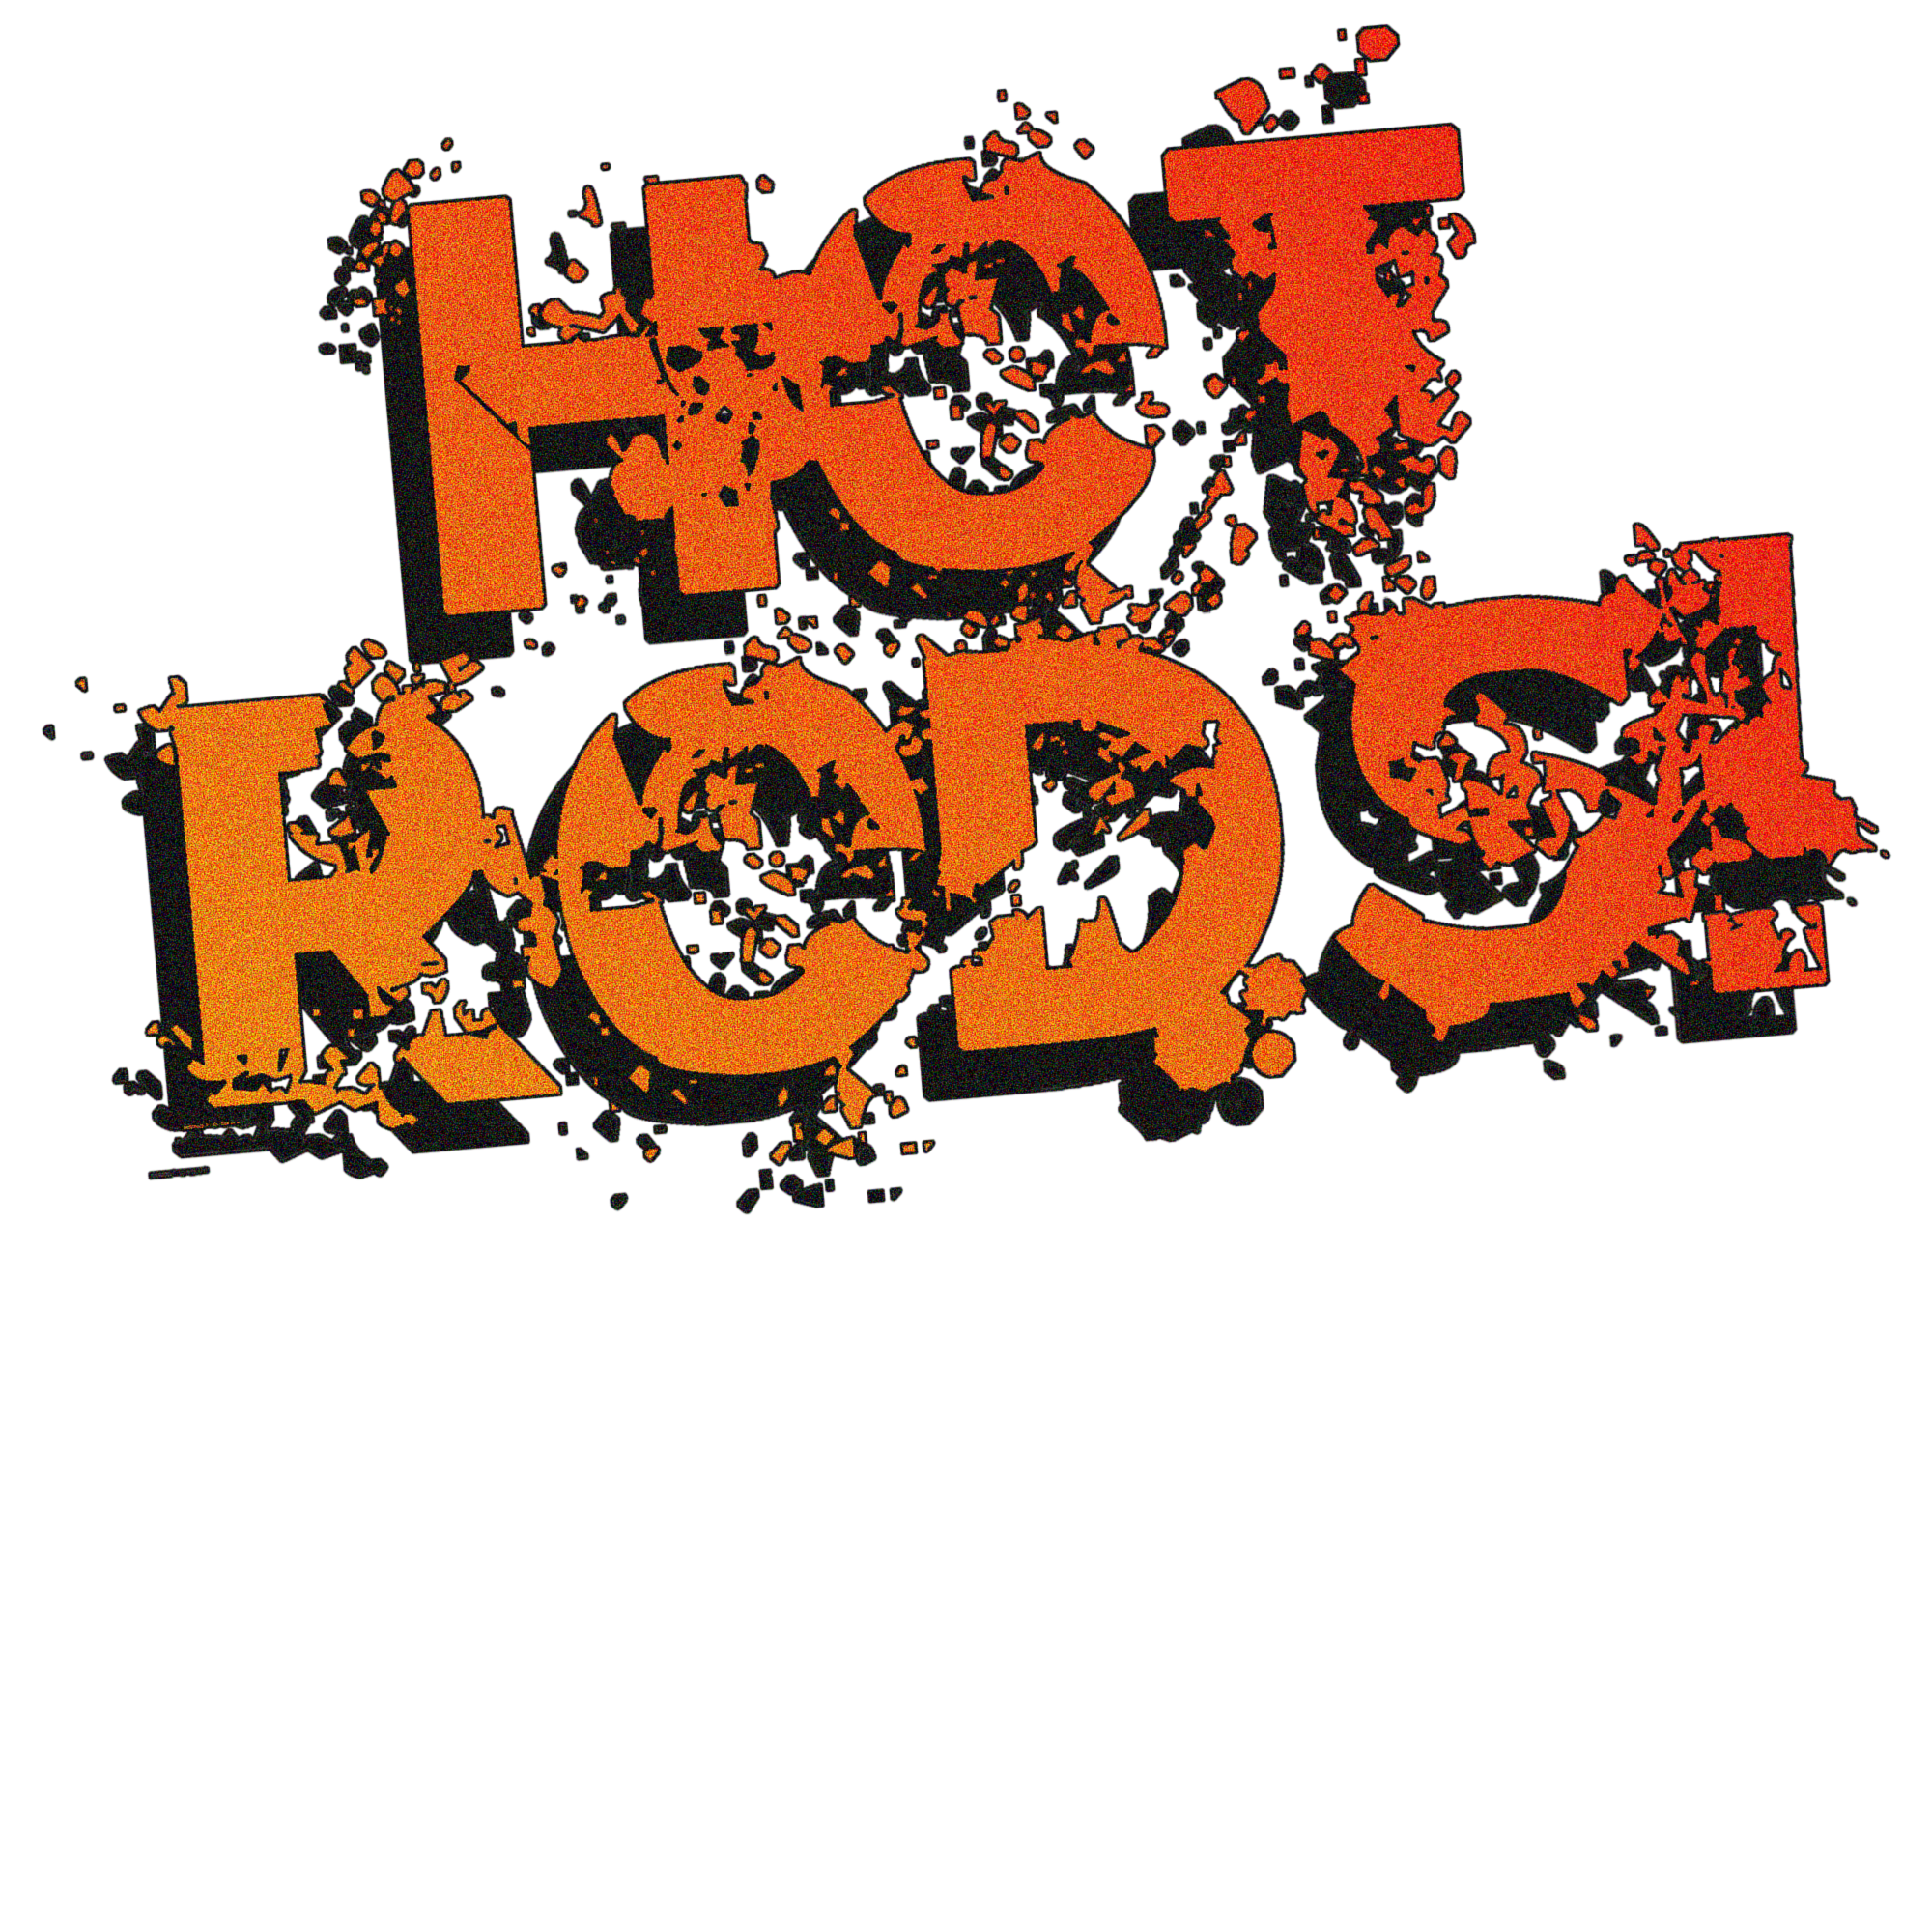 Hot Rods! - Typeface - Image